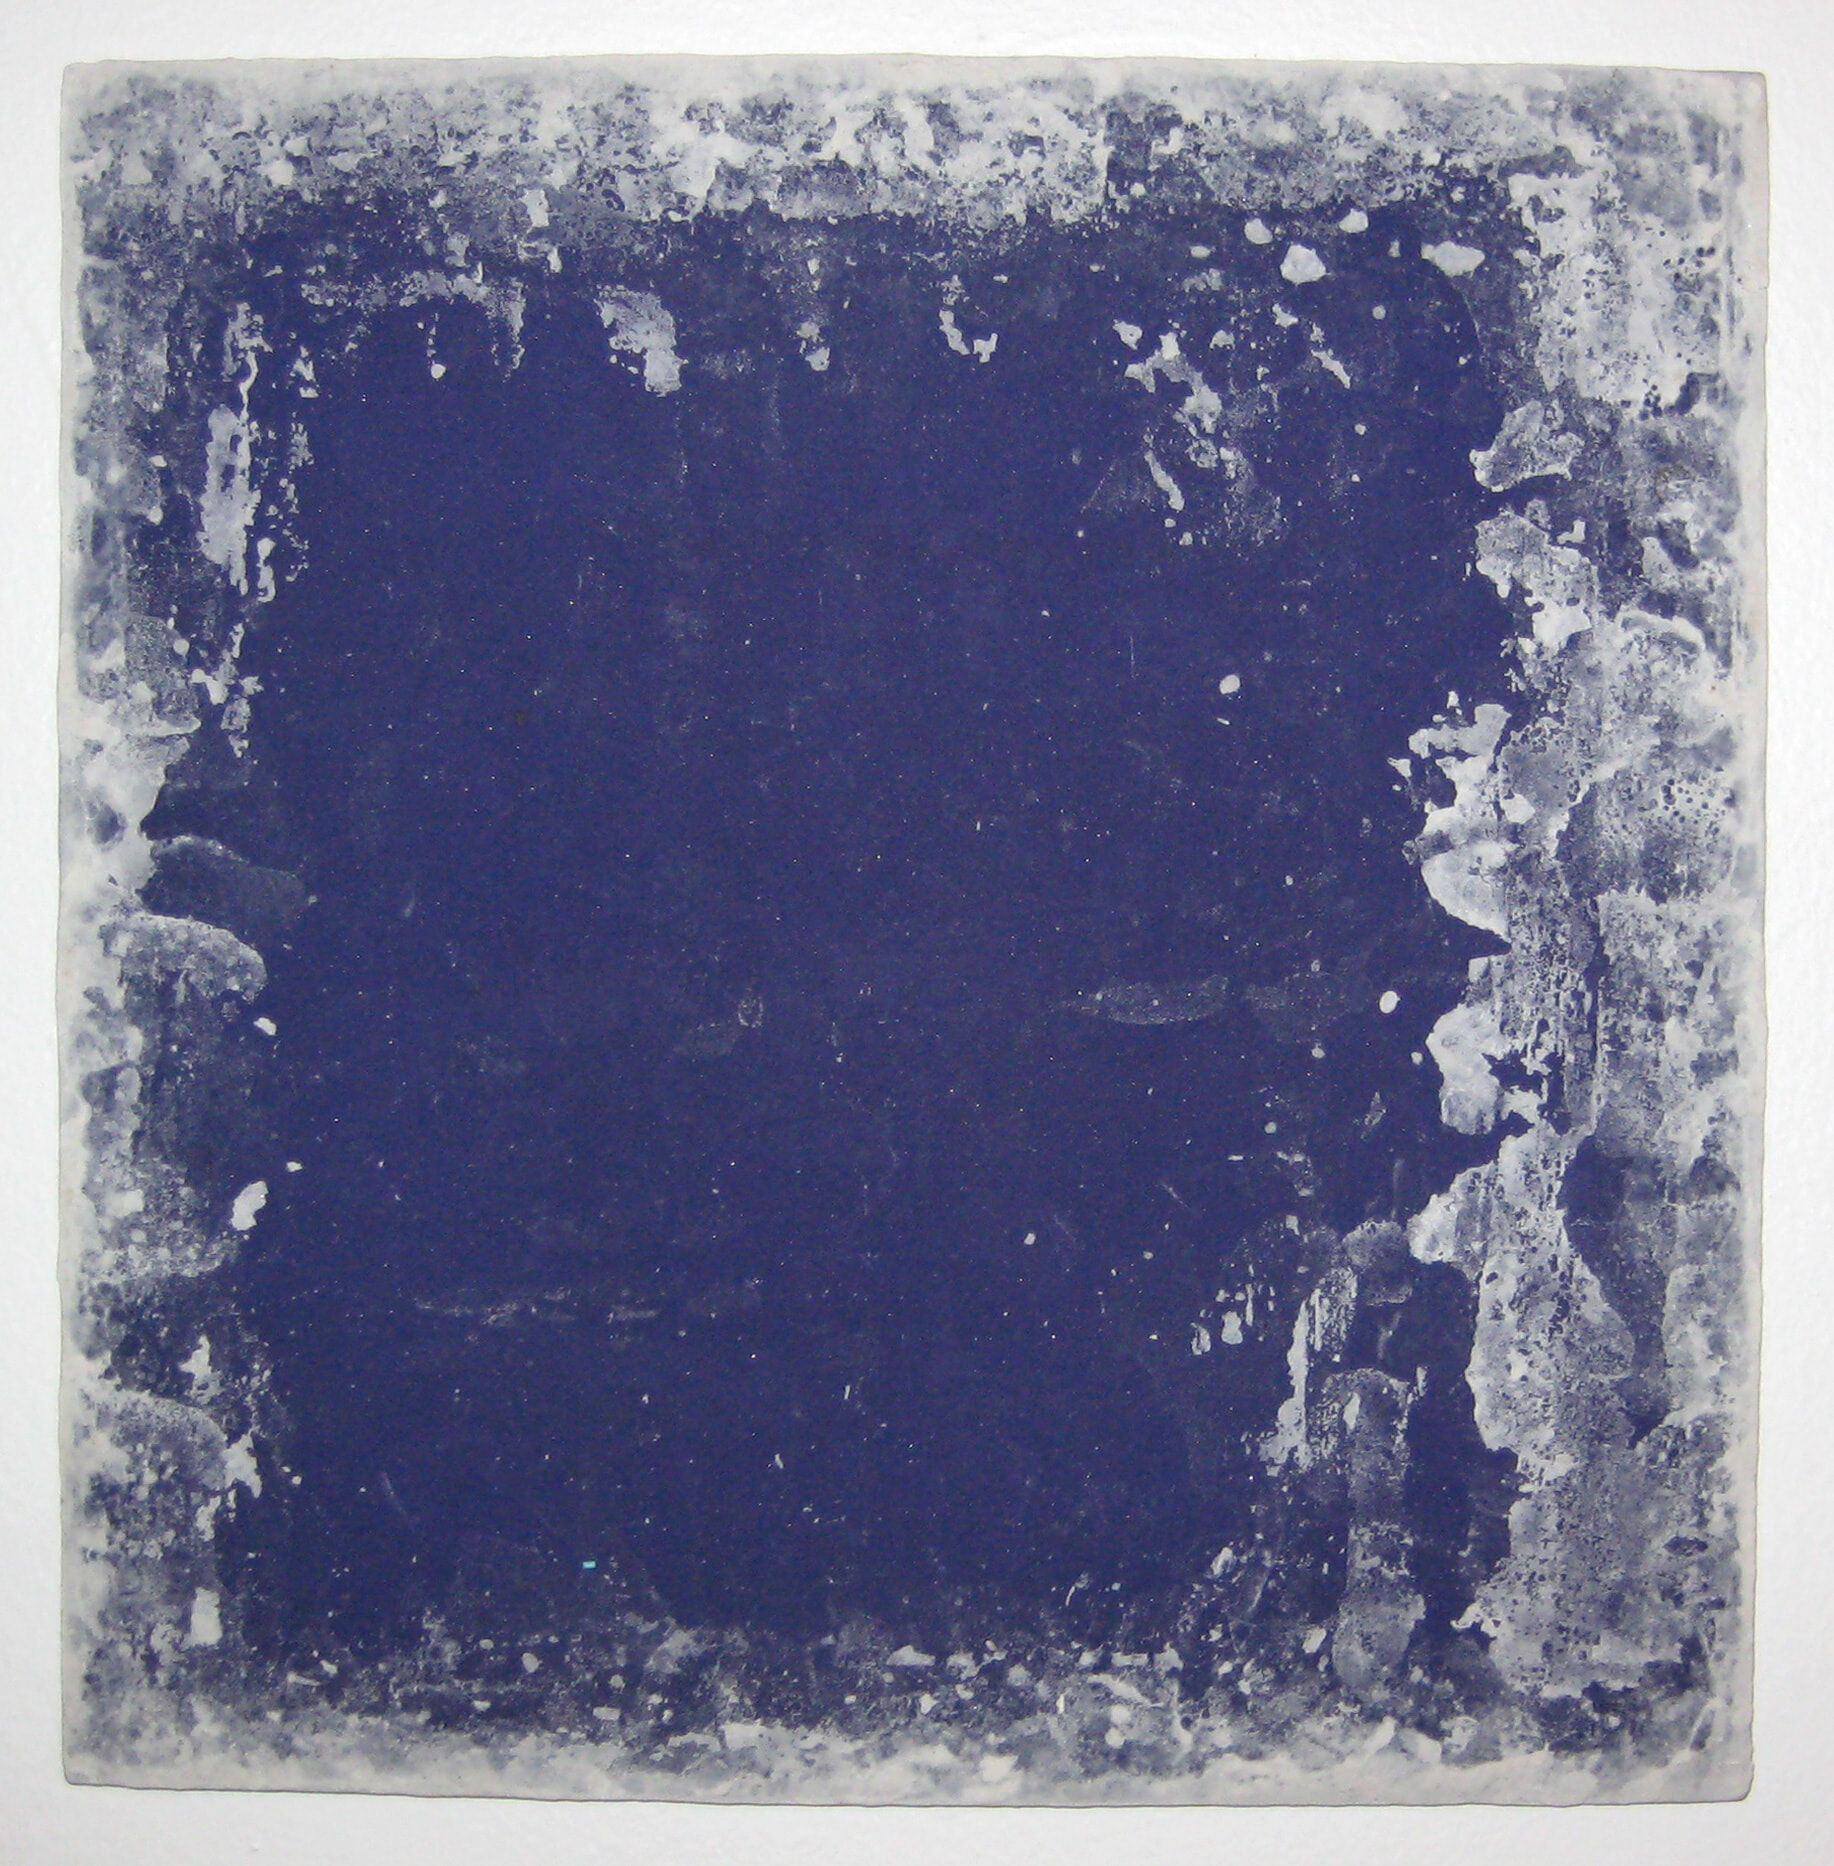 Untitled (s6), 2007 - 2008